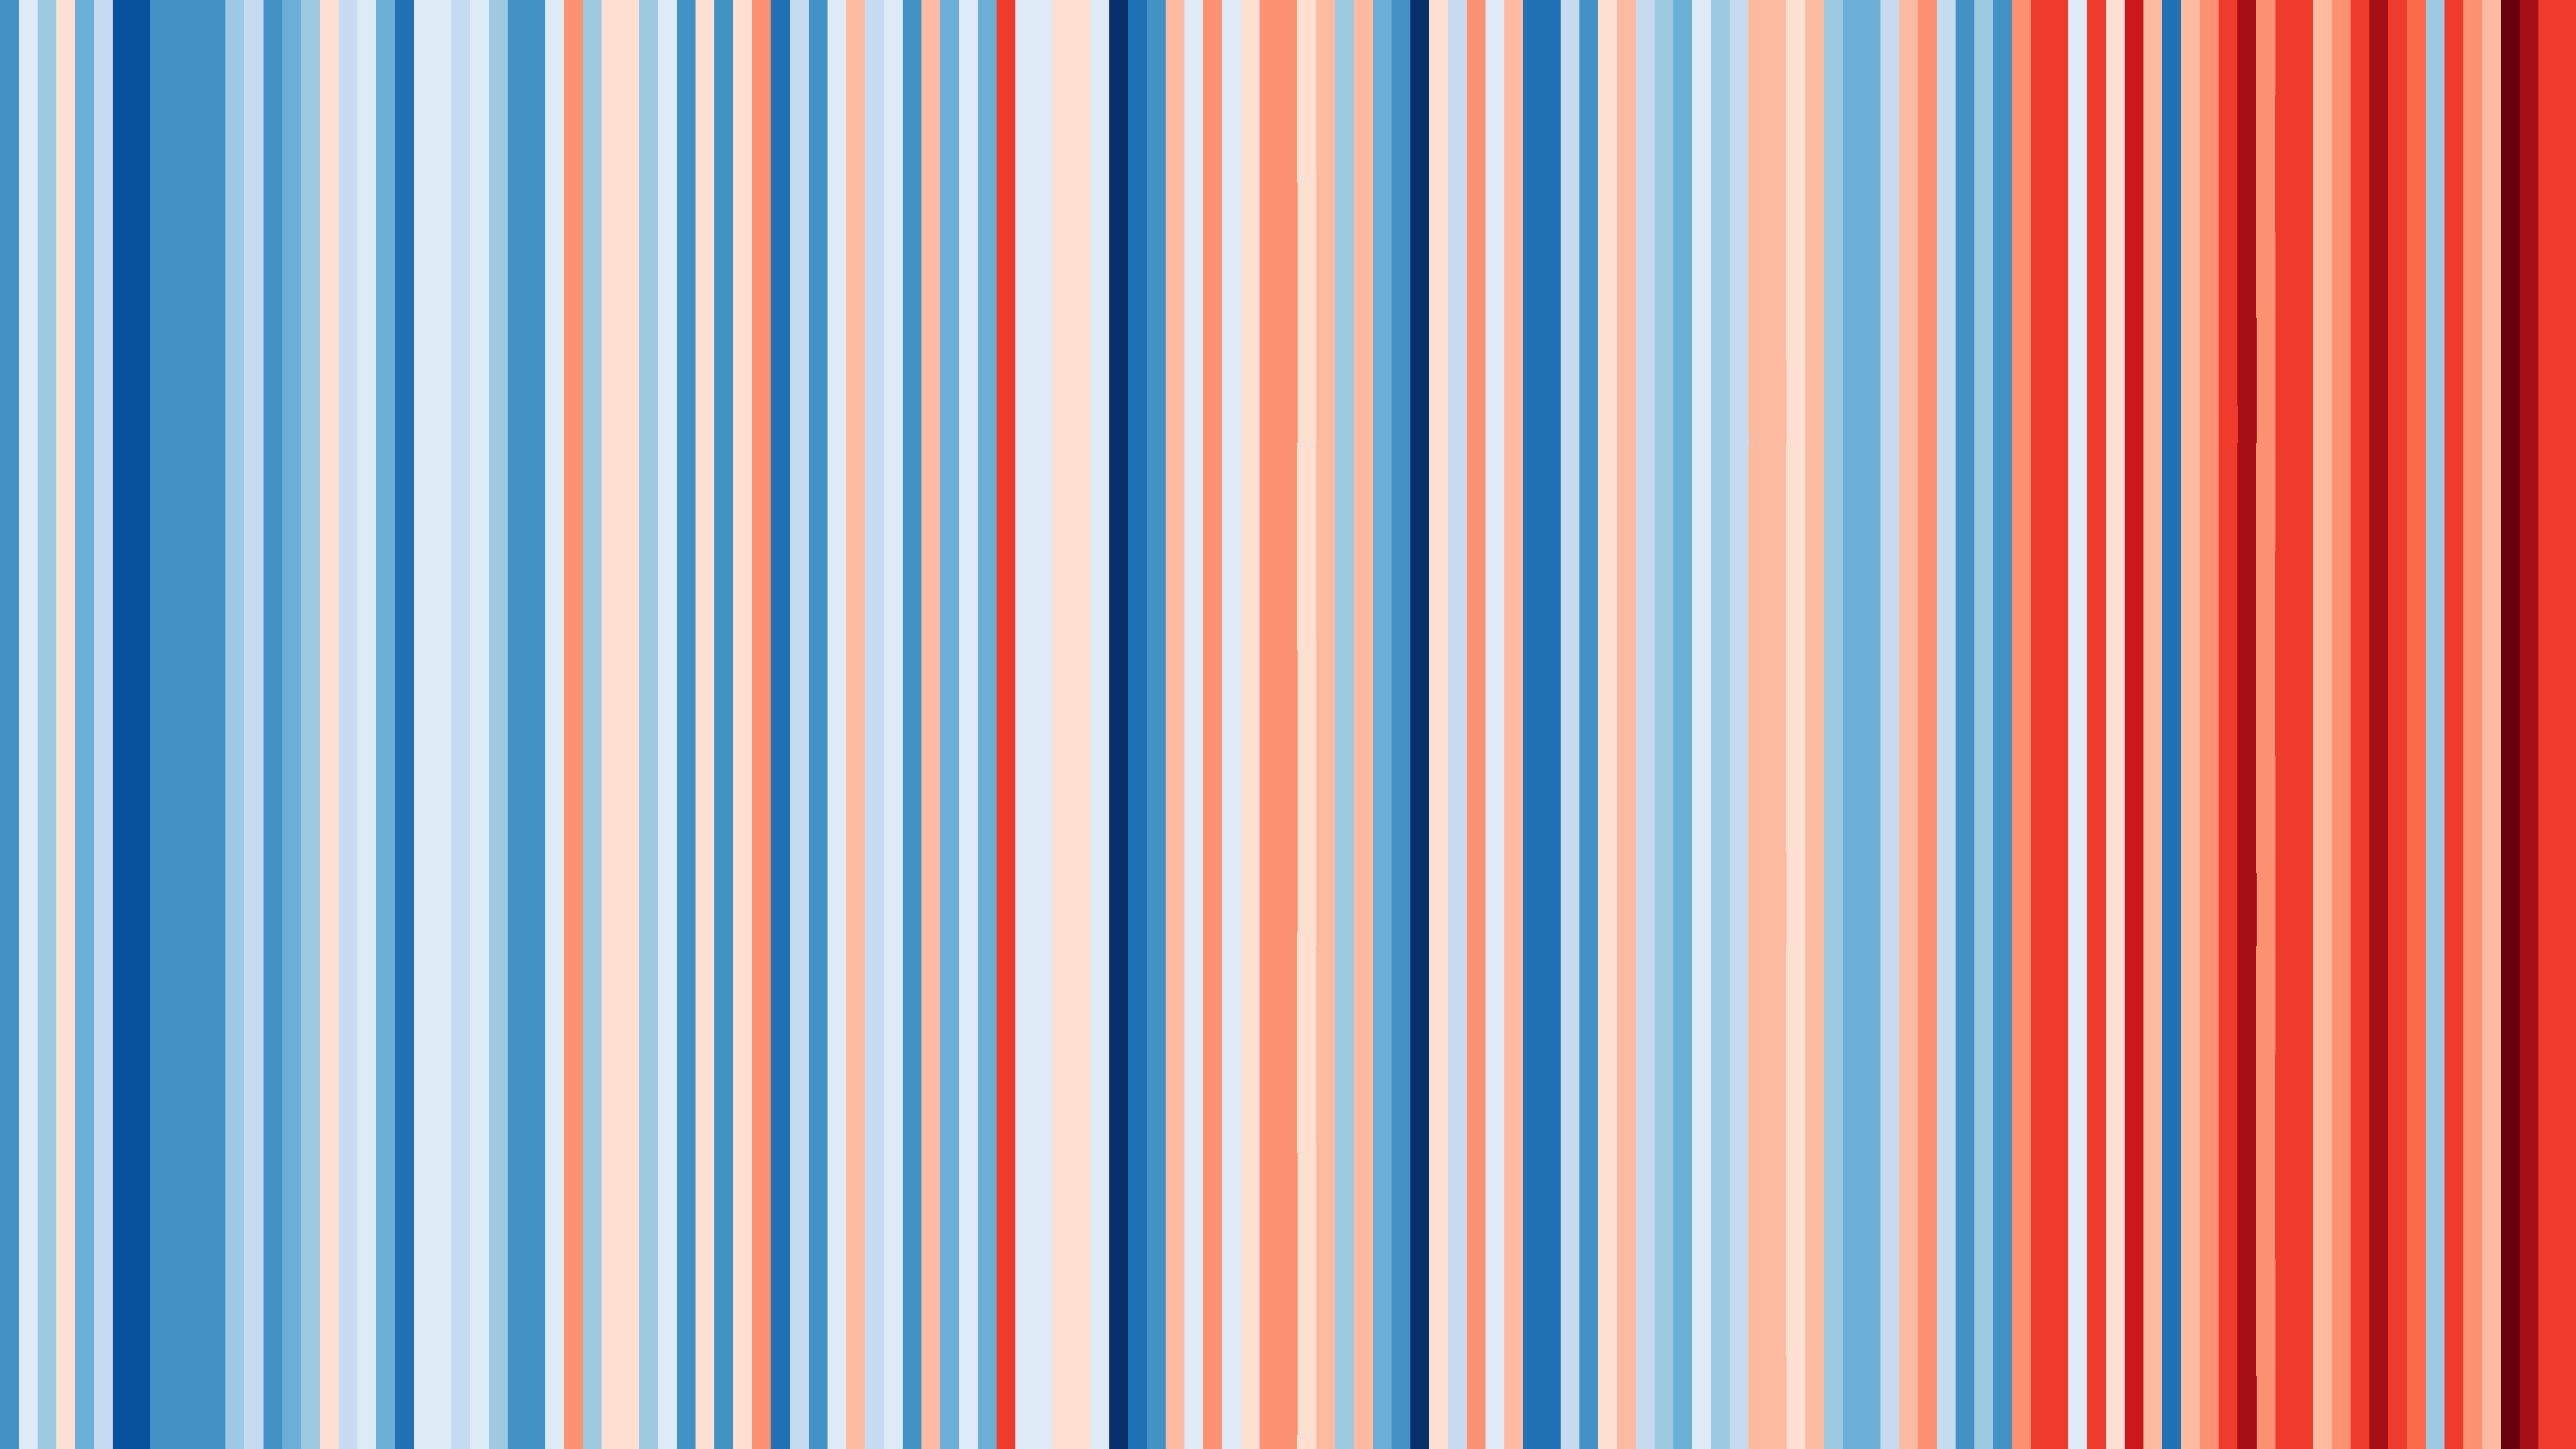 Warming stripes - Annual temperatures in Germany from 1881-2017